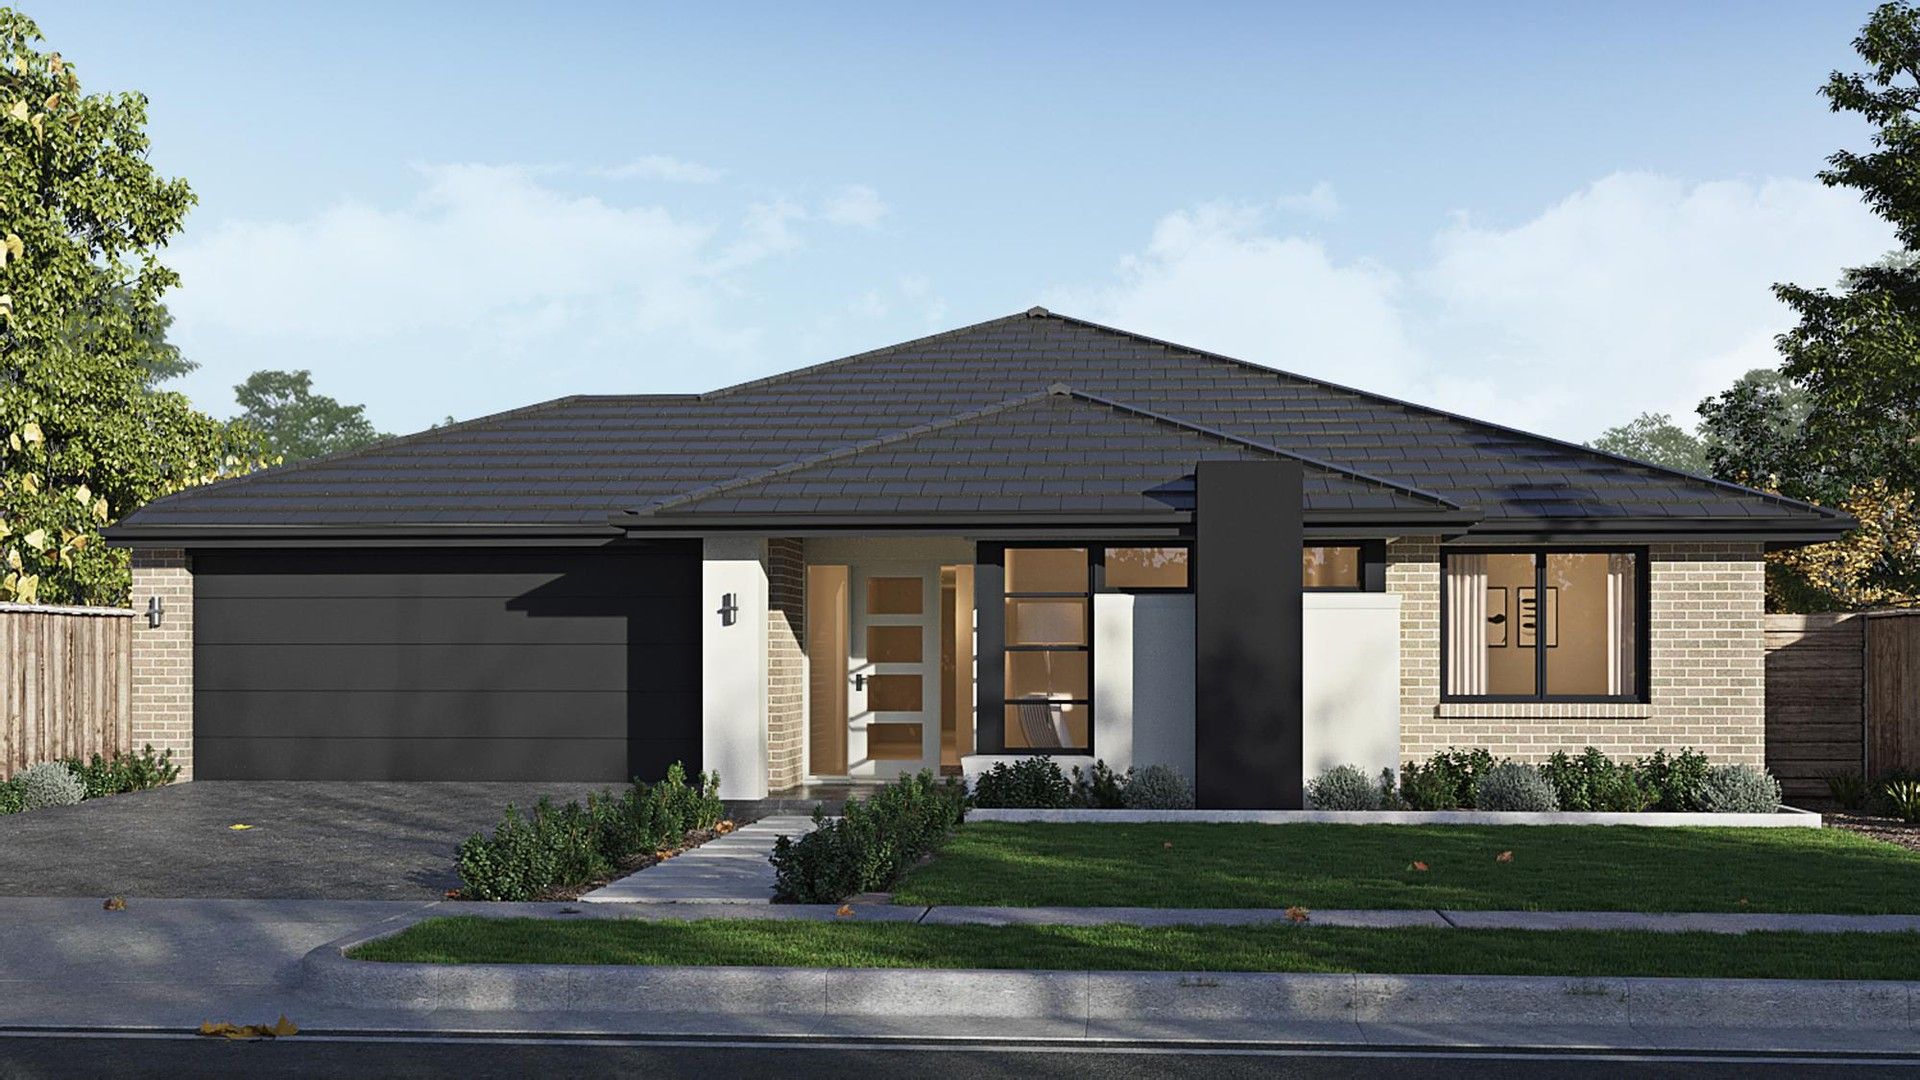 4 bedrooms New House & Land in 1588 New Road GAWLER EAST SA, 5118